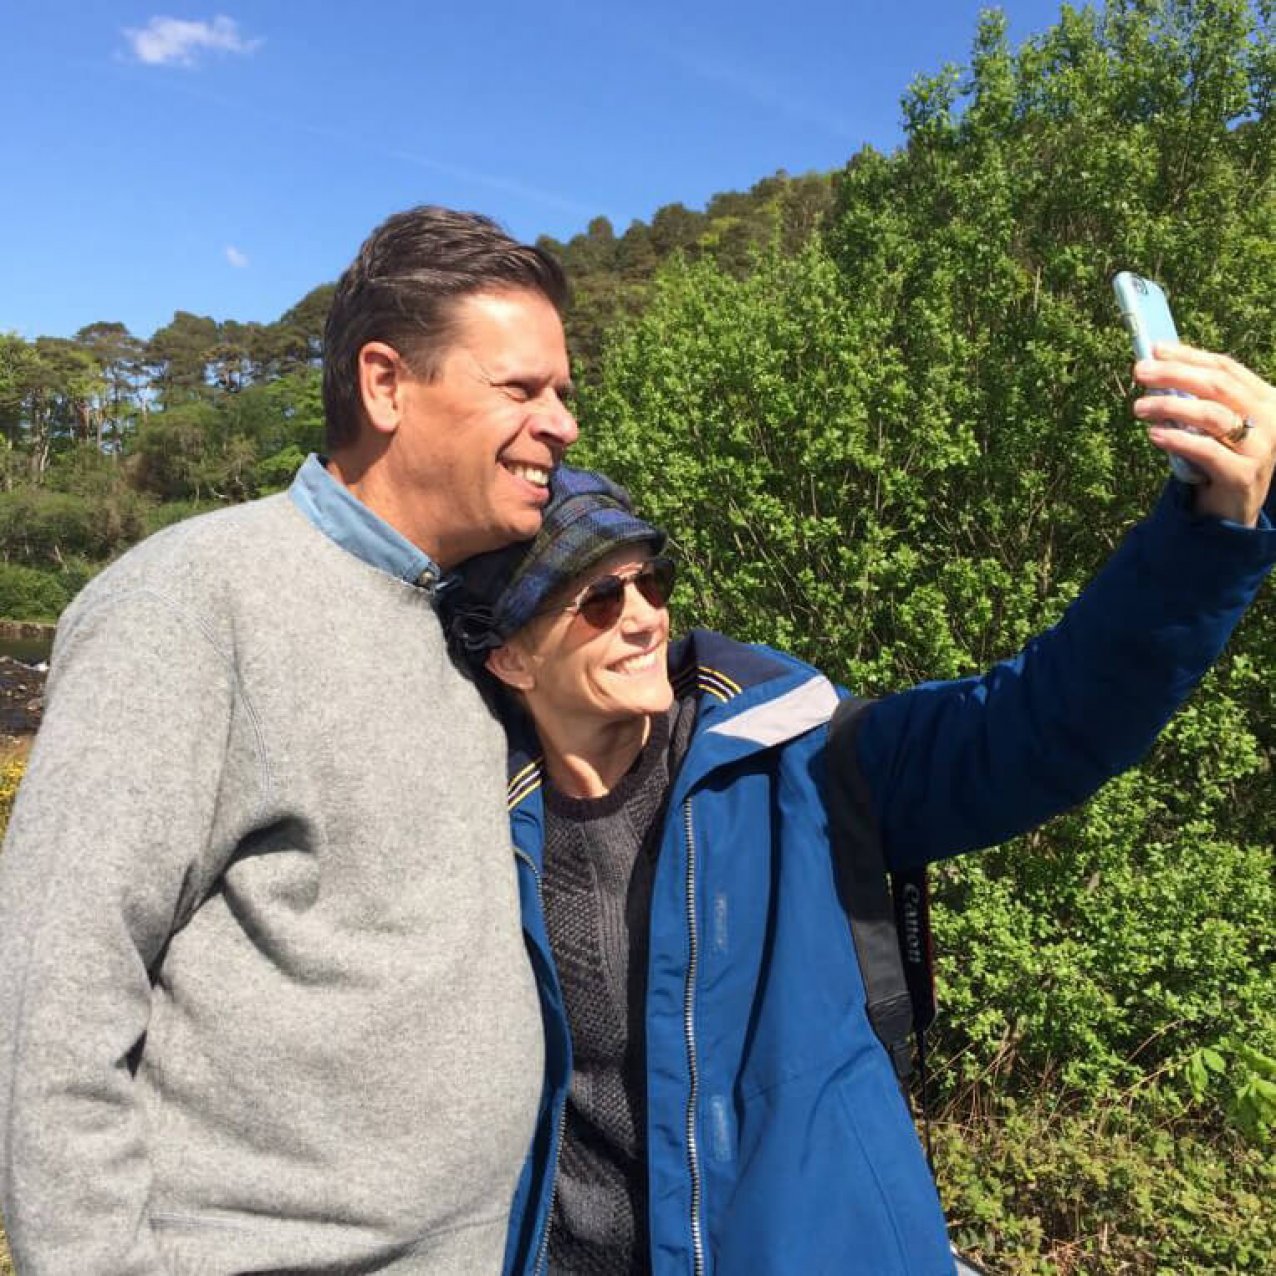 Couple smiling and taking a selfie in Ireland